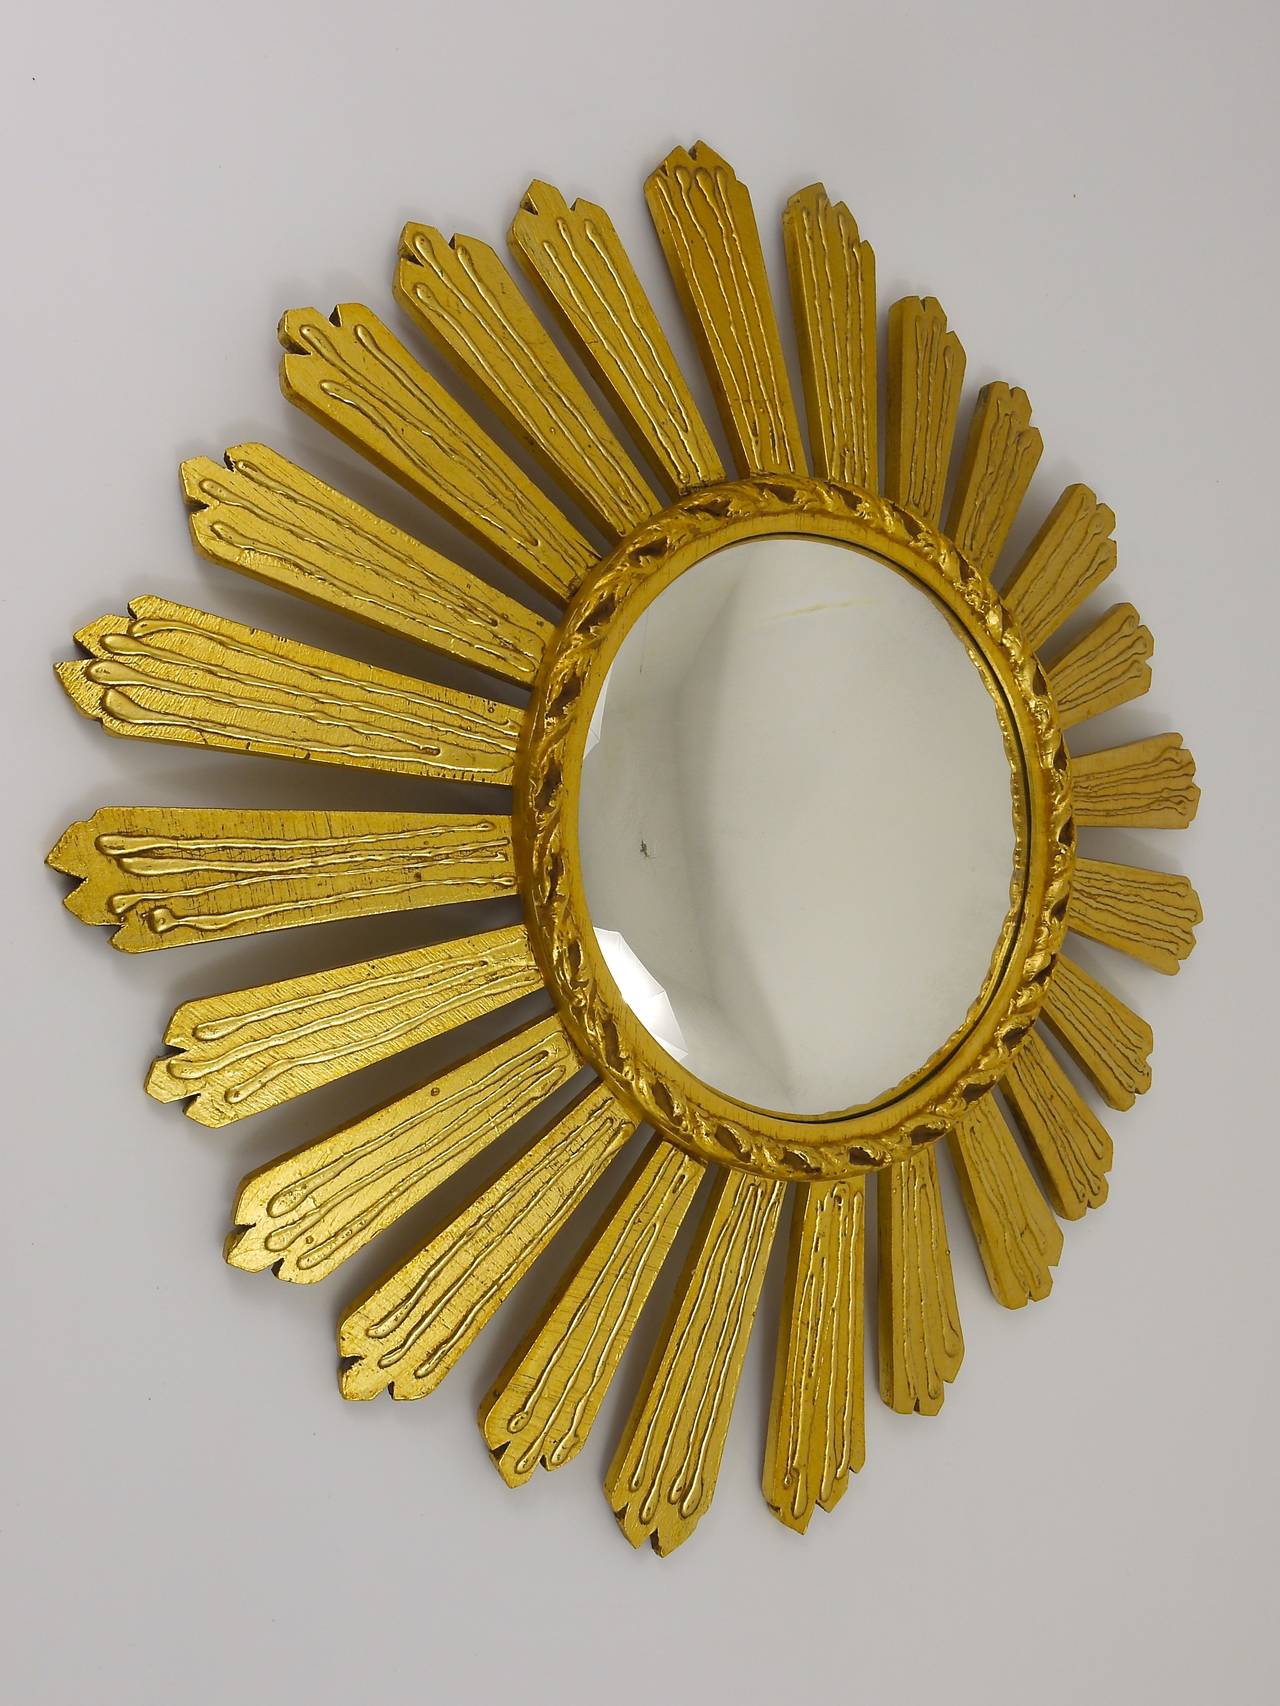 A beautiful and decorative sunburst/starburst gilt wall mirror with convex glass from France, carved wood, dated around 1950. A very beautiful and decorative object in very good condition. Diameter 26 in;. Right now we are offering many other